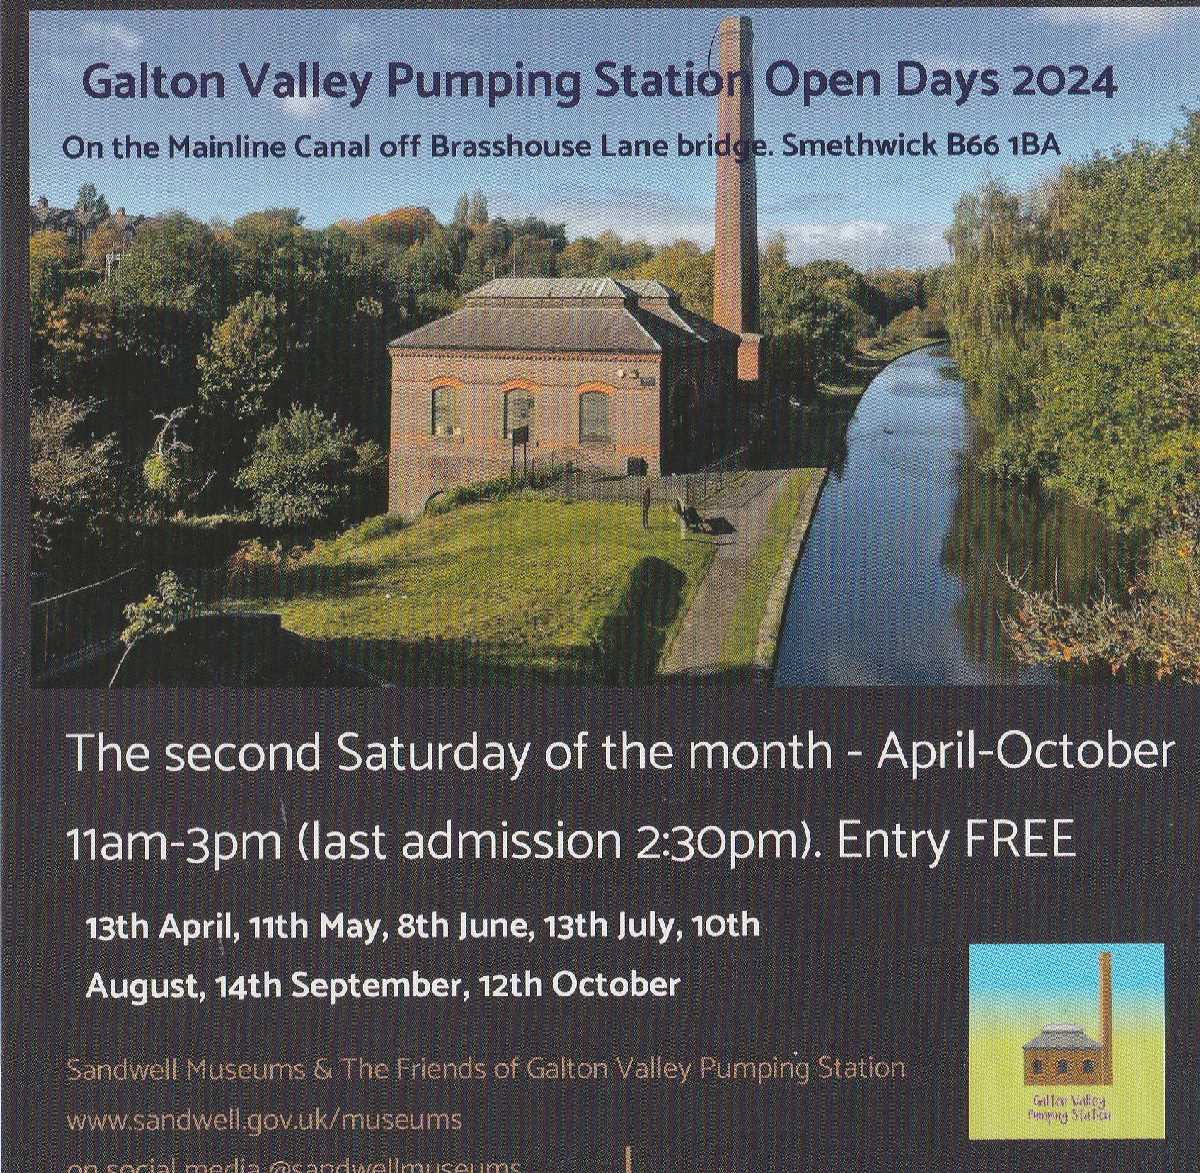 The Friends of Galton Valley Pumping Station